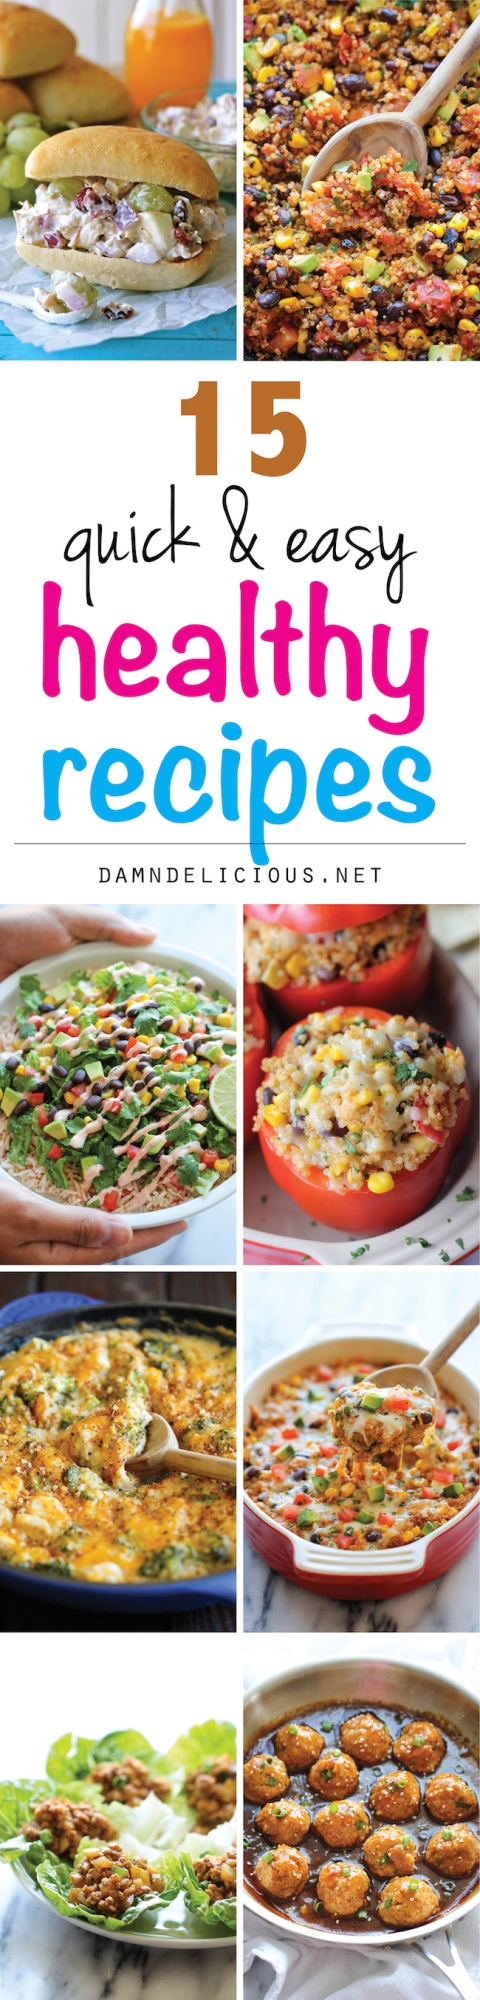 15-Quick-and-Easy-Healthy-Recipes-480x2000